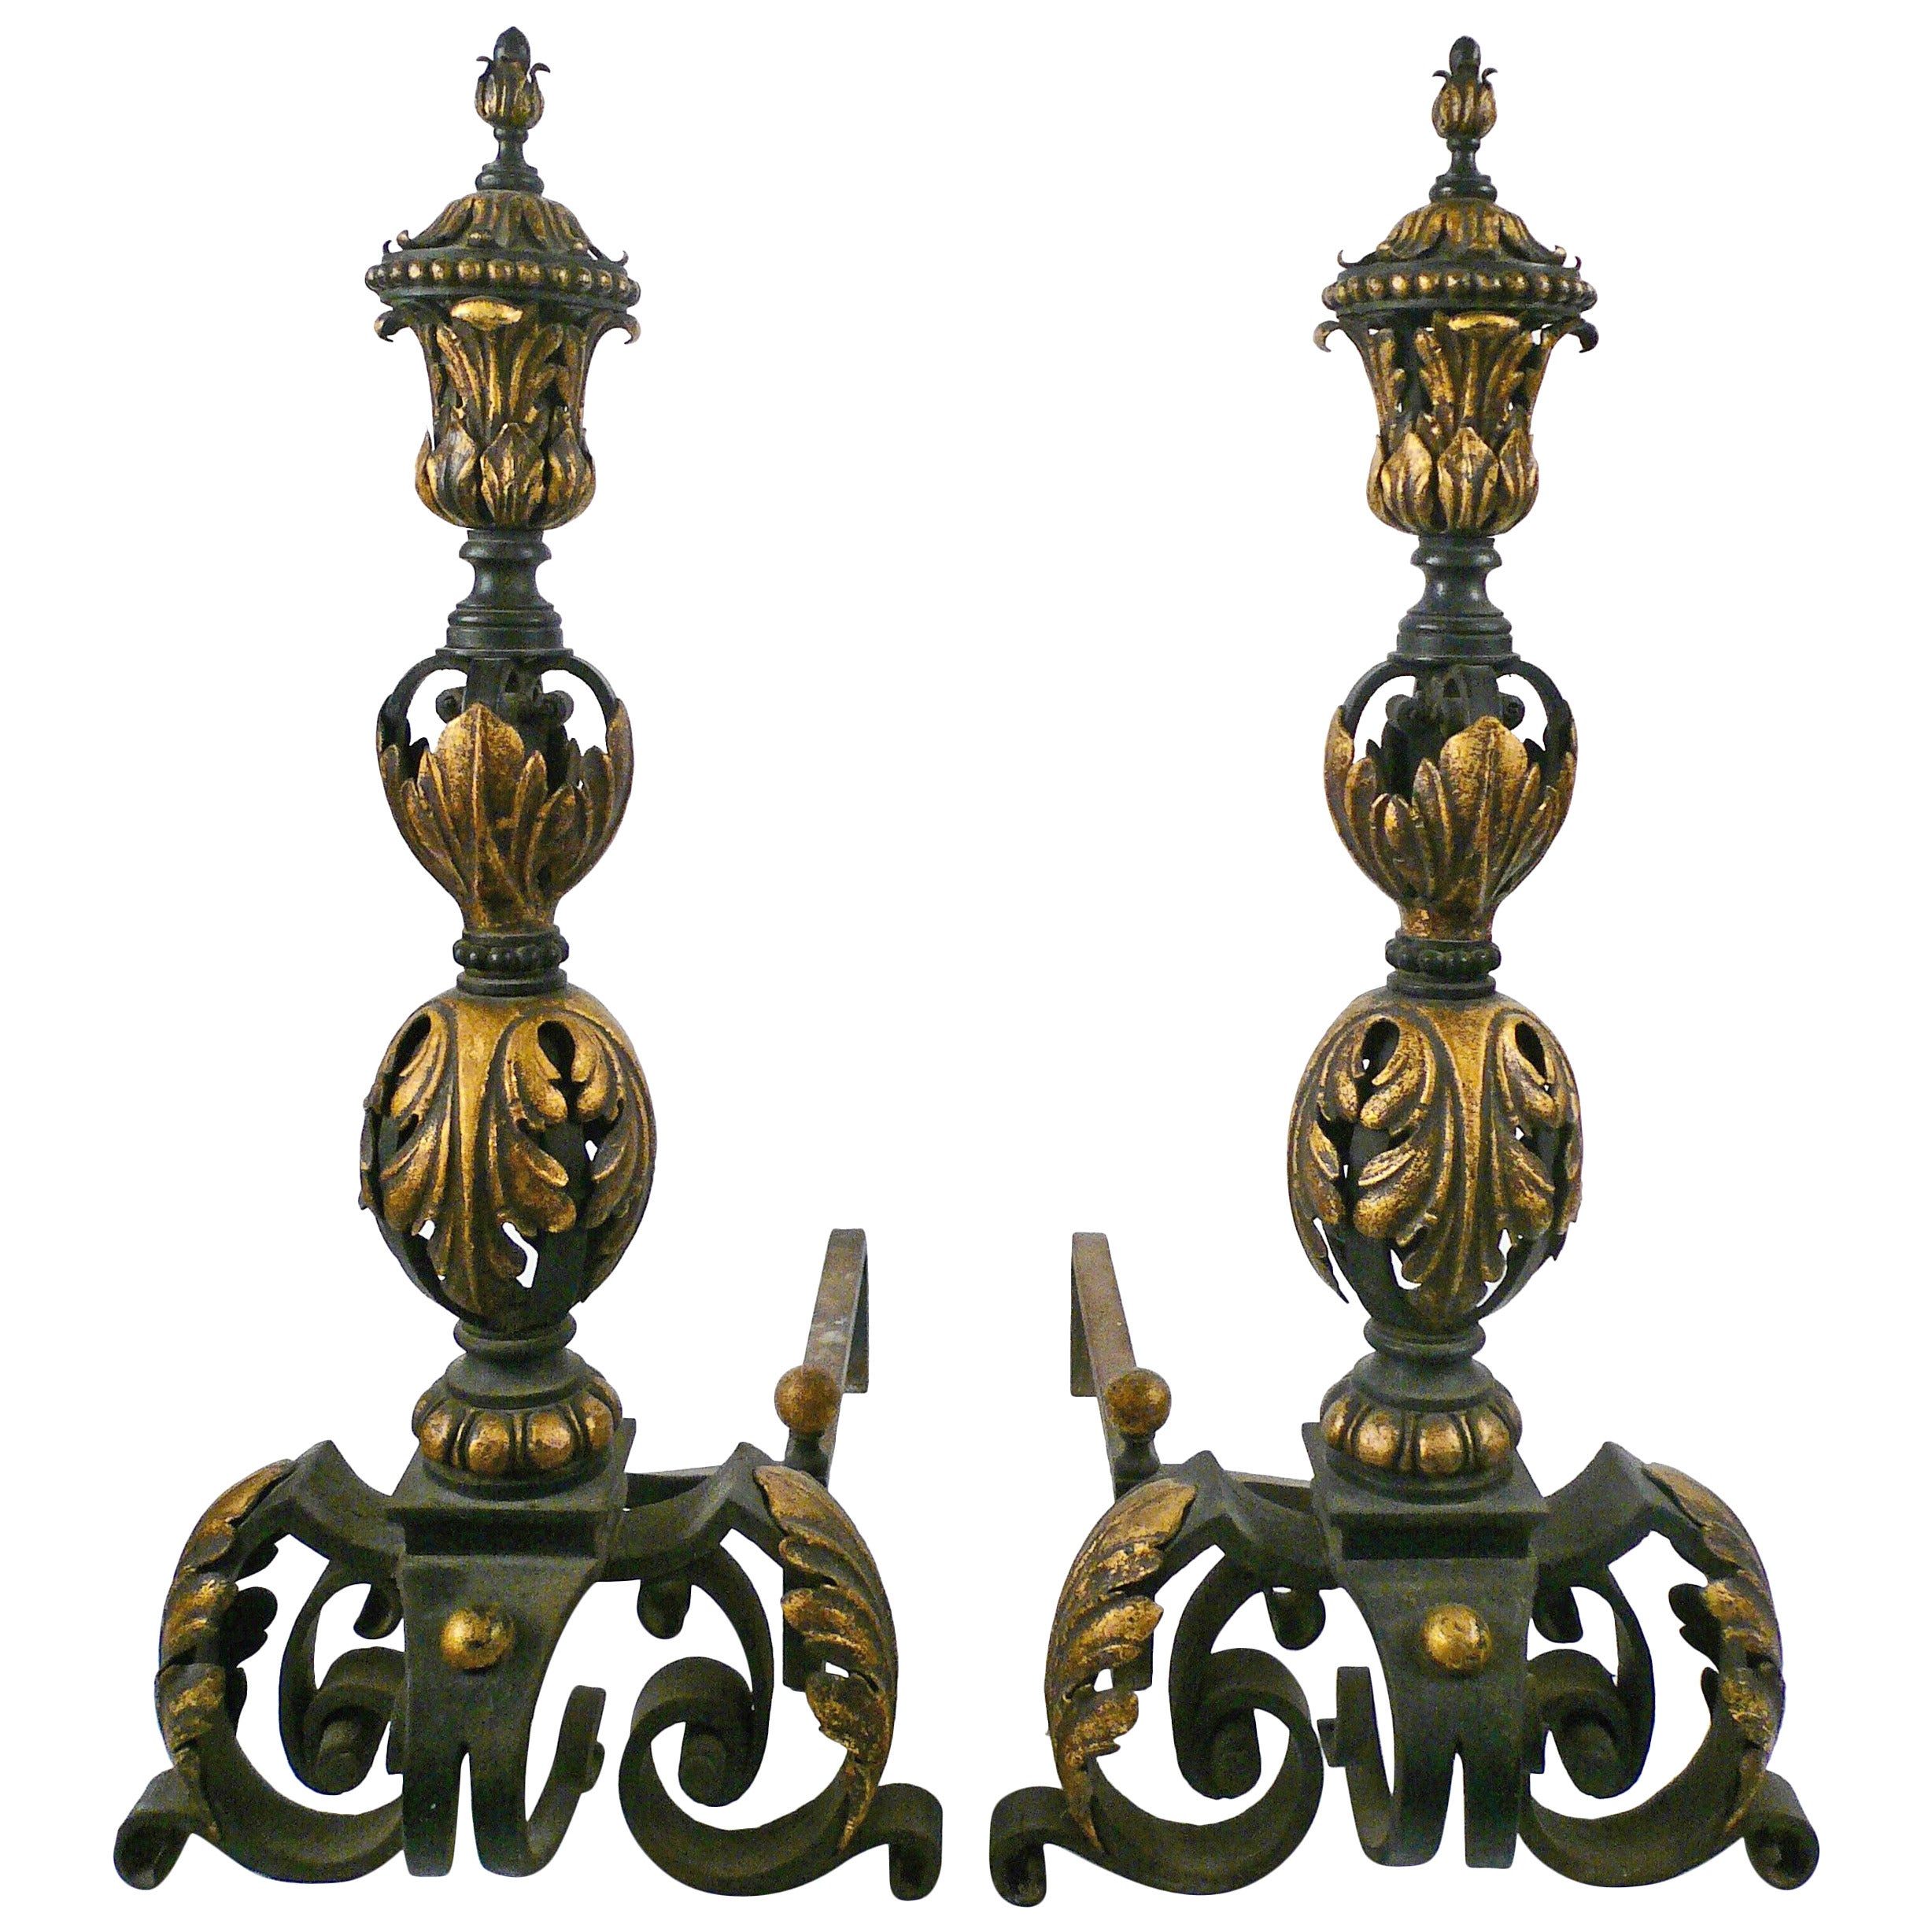 Massive Pair of Patinated and Gilt Wrought Iron Andirons